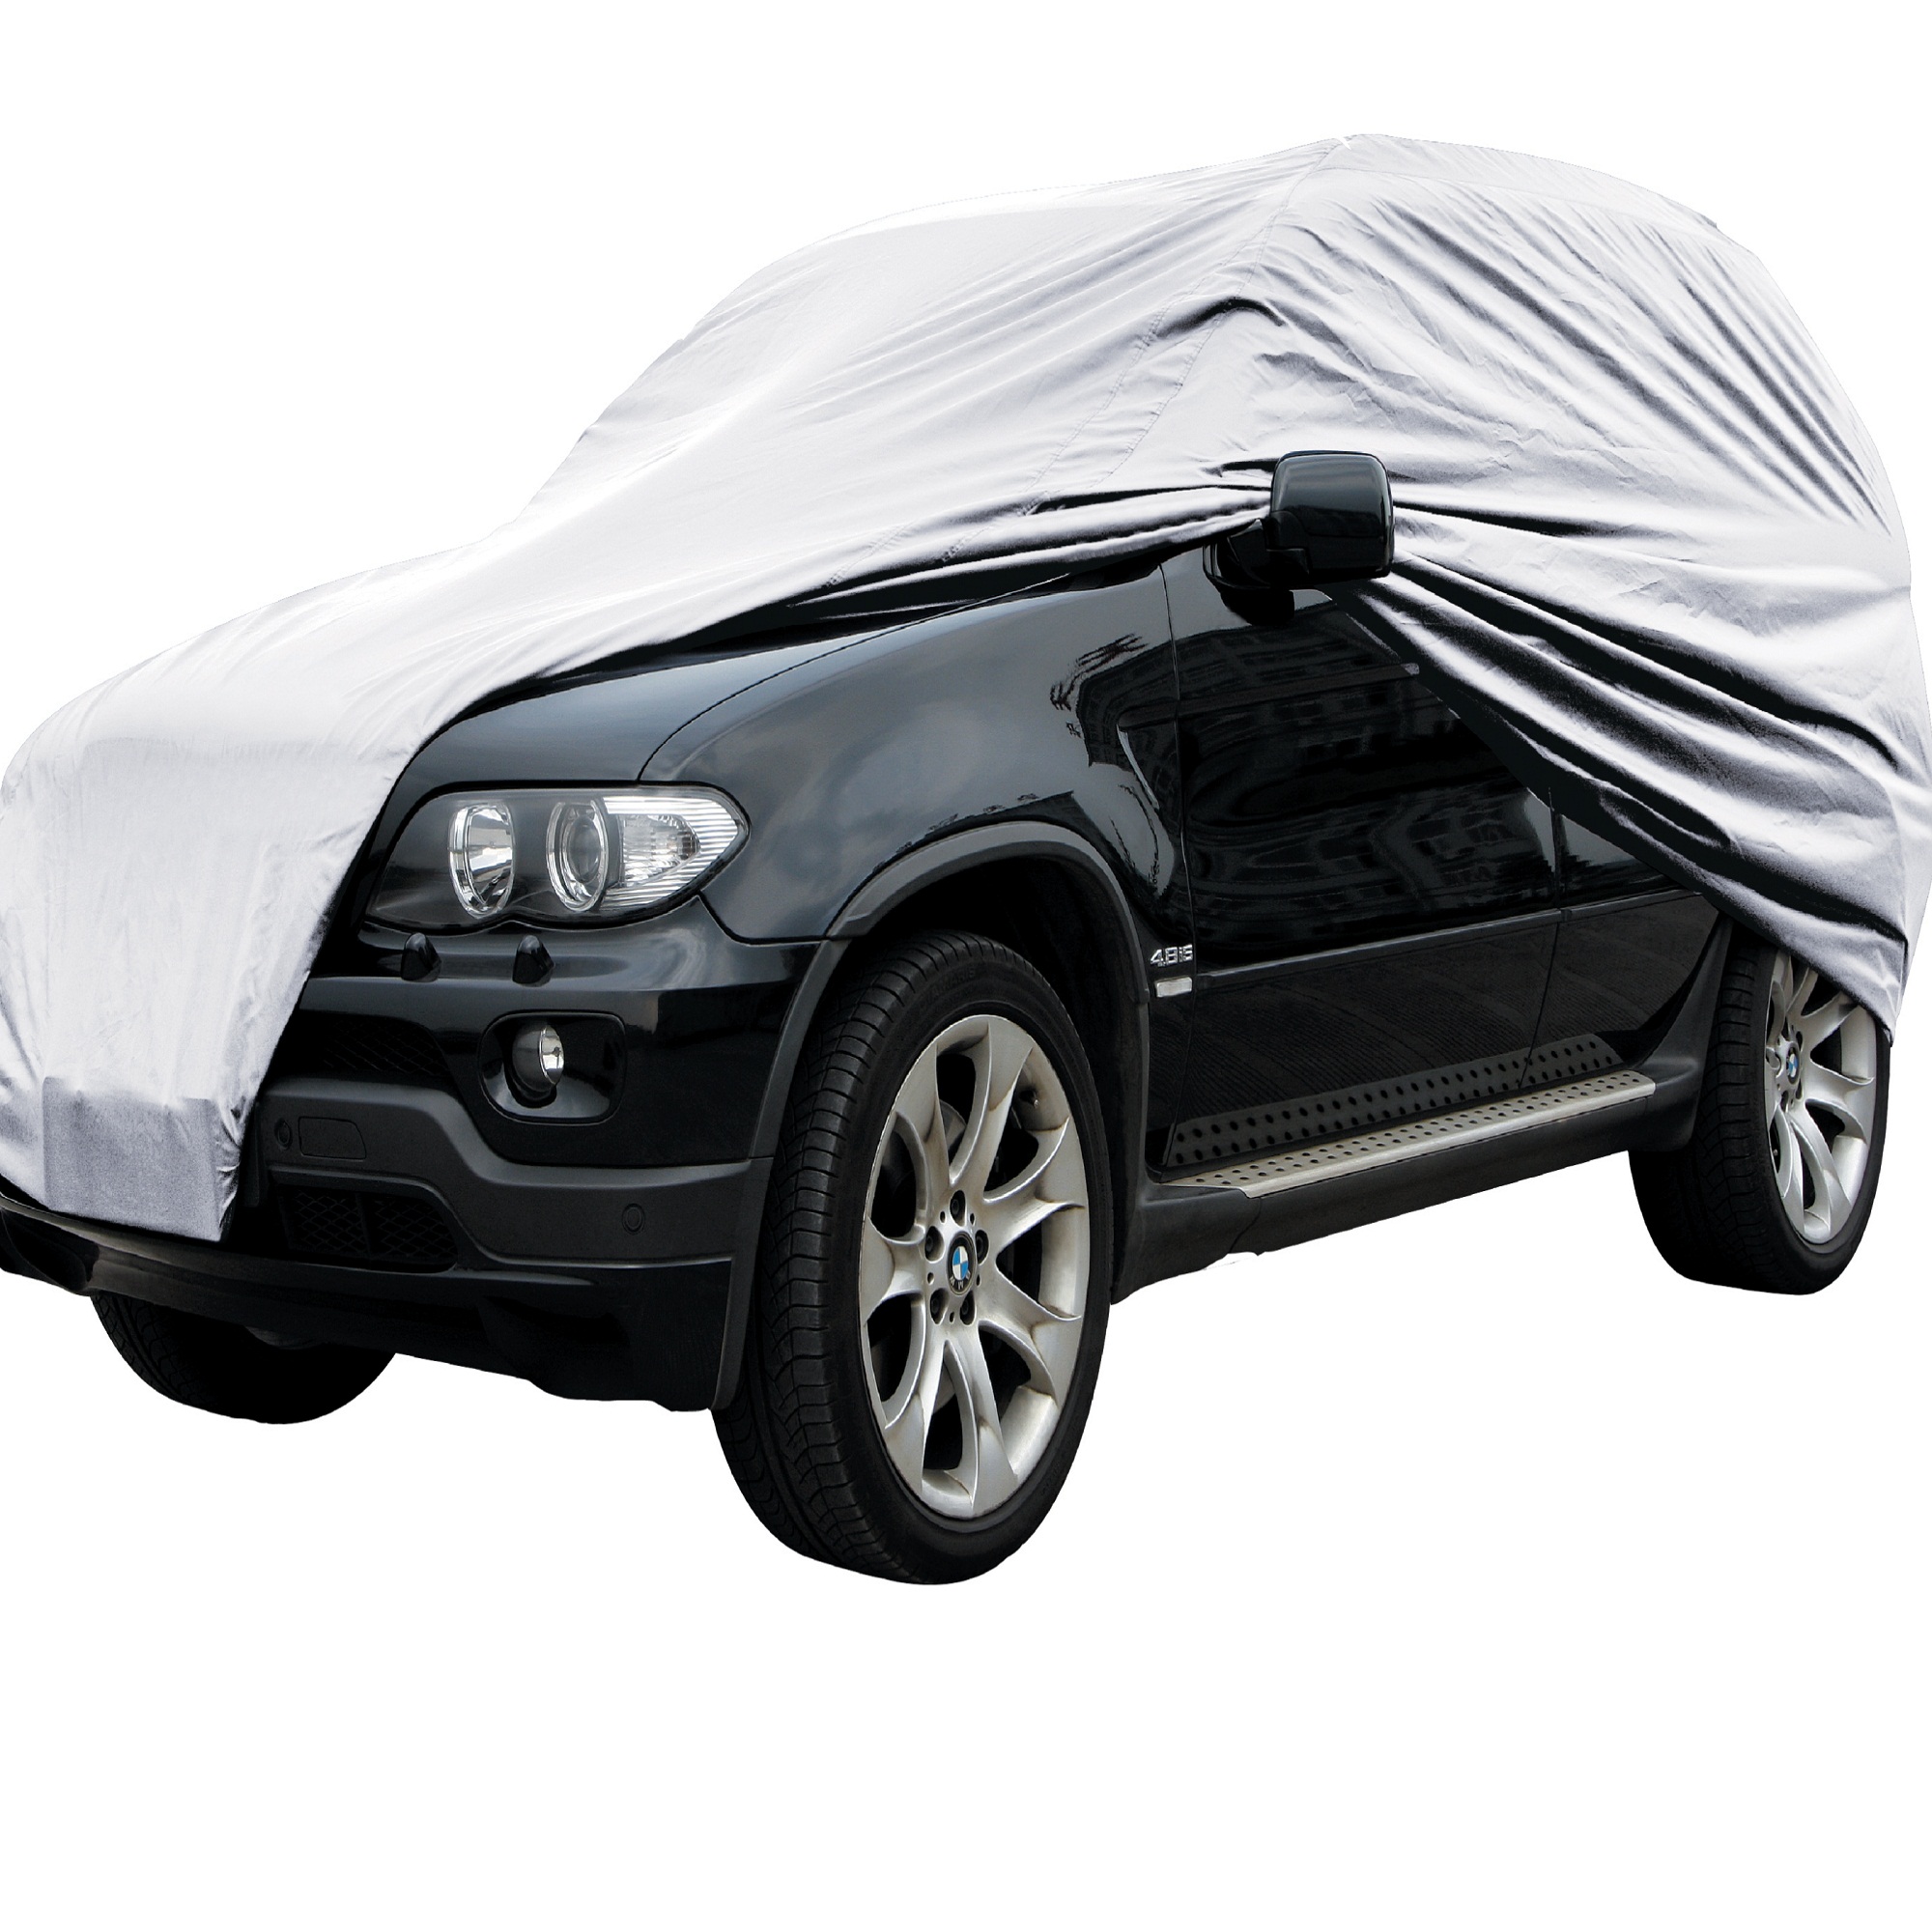  Car Cover for Citroen C1 C2 C3  Universal Durable Car Cover/Dustproof  Car Cover/Sun Waterproof Car Cover - Scratch Proof/Durable/Breathable/Uv  Protection with Zip Cotton Lined (Color : B, Size : C1 